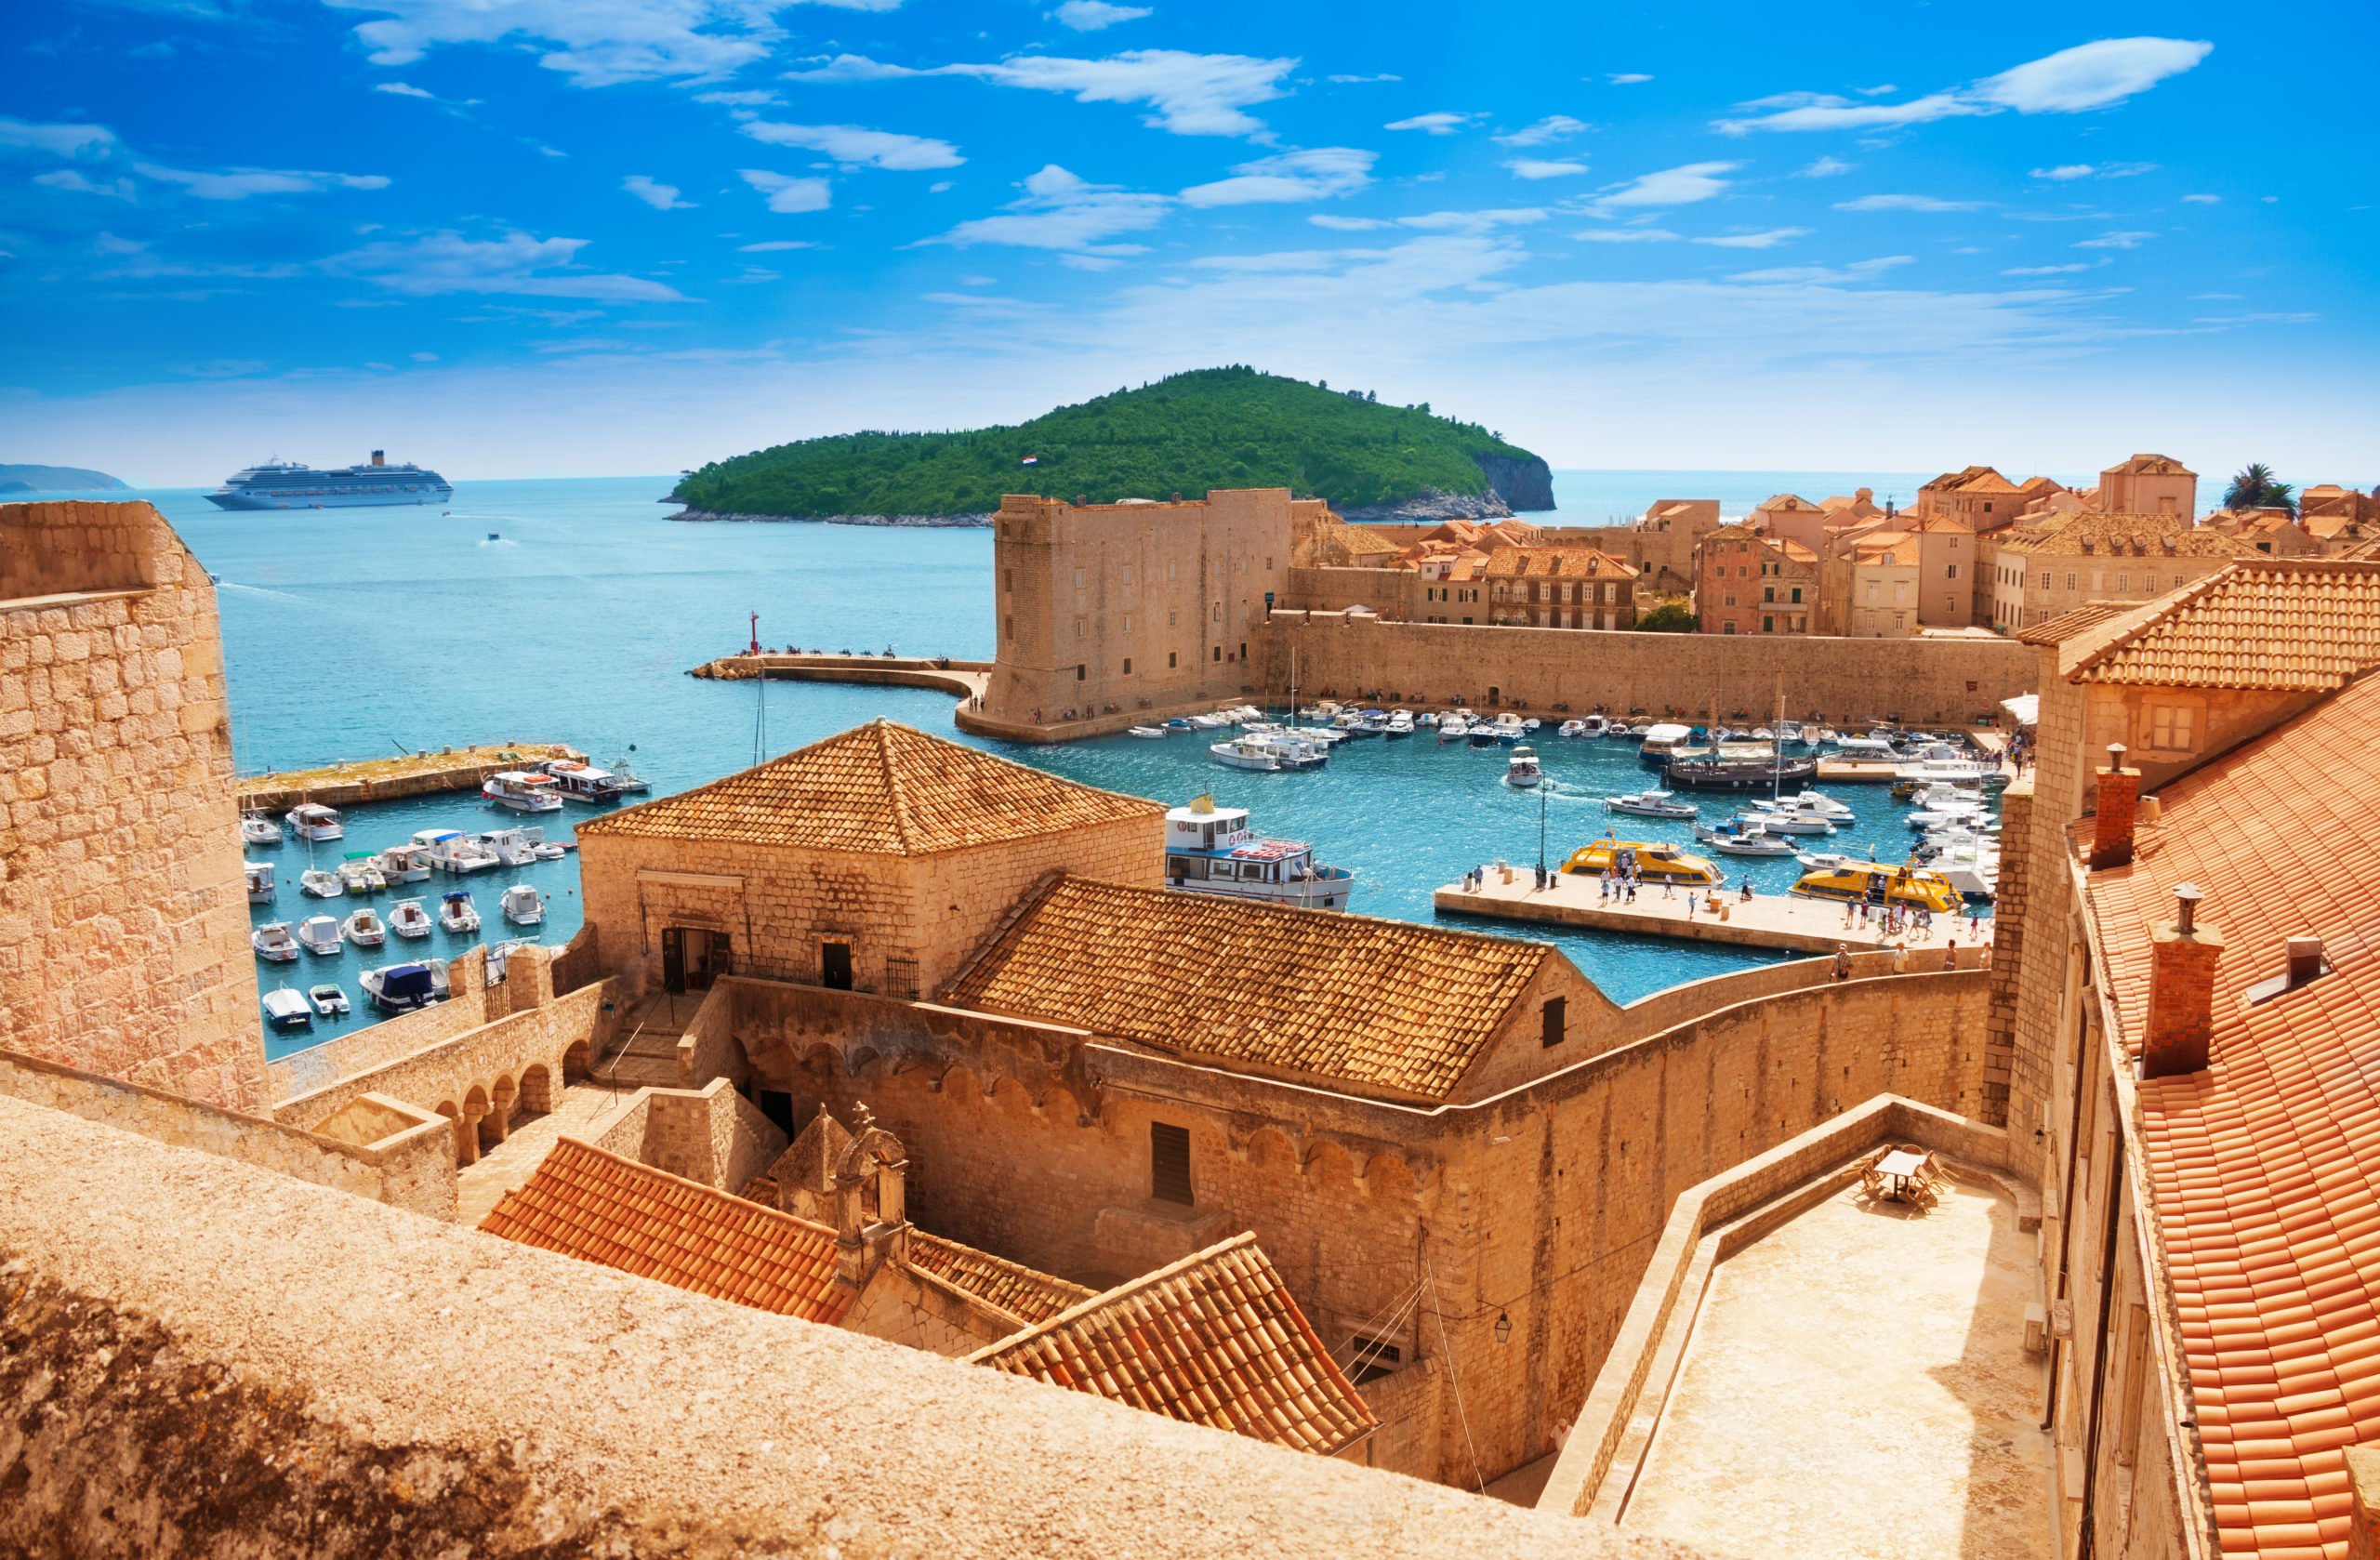 Stay Overnight And Discover The City Of Dubrovnik On The 7 Day Highlights Of Croatia Package Tour